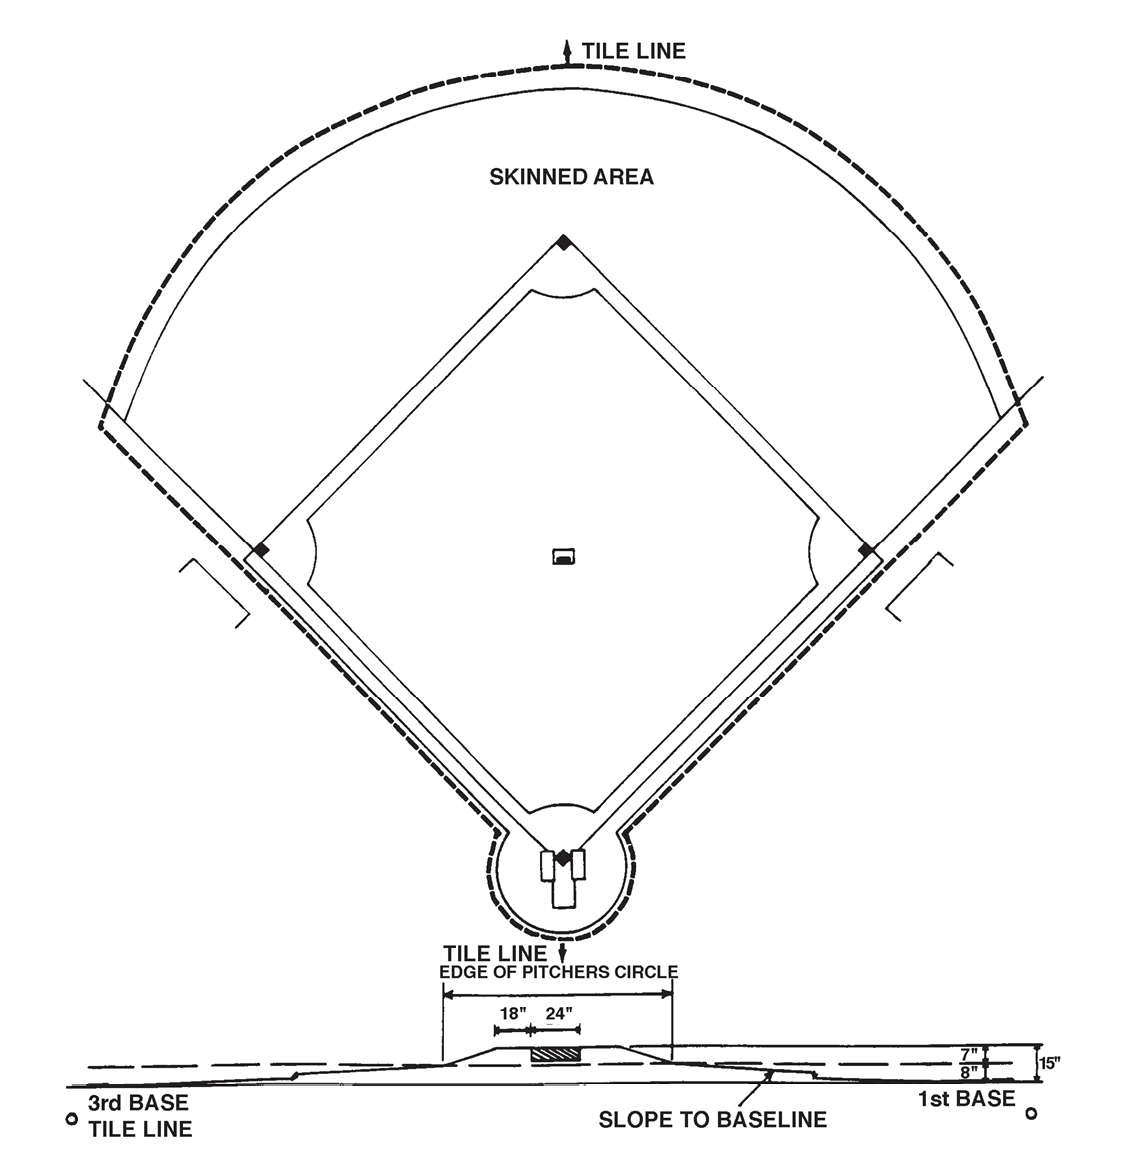 Diagram of the surface slope and drainage design of a regulation baseball infield. The highest point on the field is the pitcher’s mound, from which slope is set to move water away from the center of the surface. The infield dirt or clay is referred to as the “skin.” The skin surface rings the baselines and is itself ringed by a tile line, or perforated pipe, intended to drain surface and sub-surface water from the in-field playing surface.